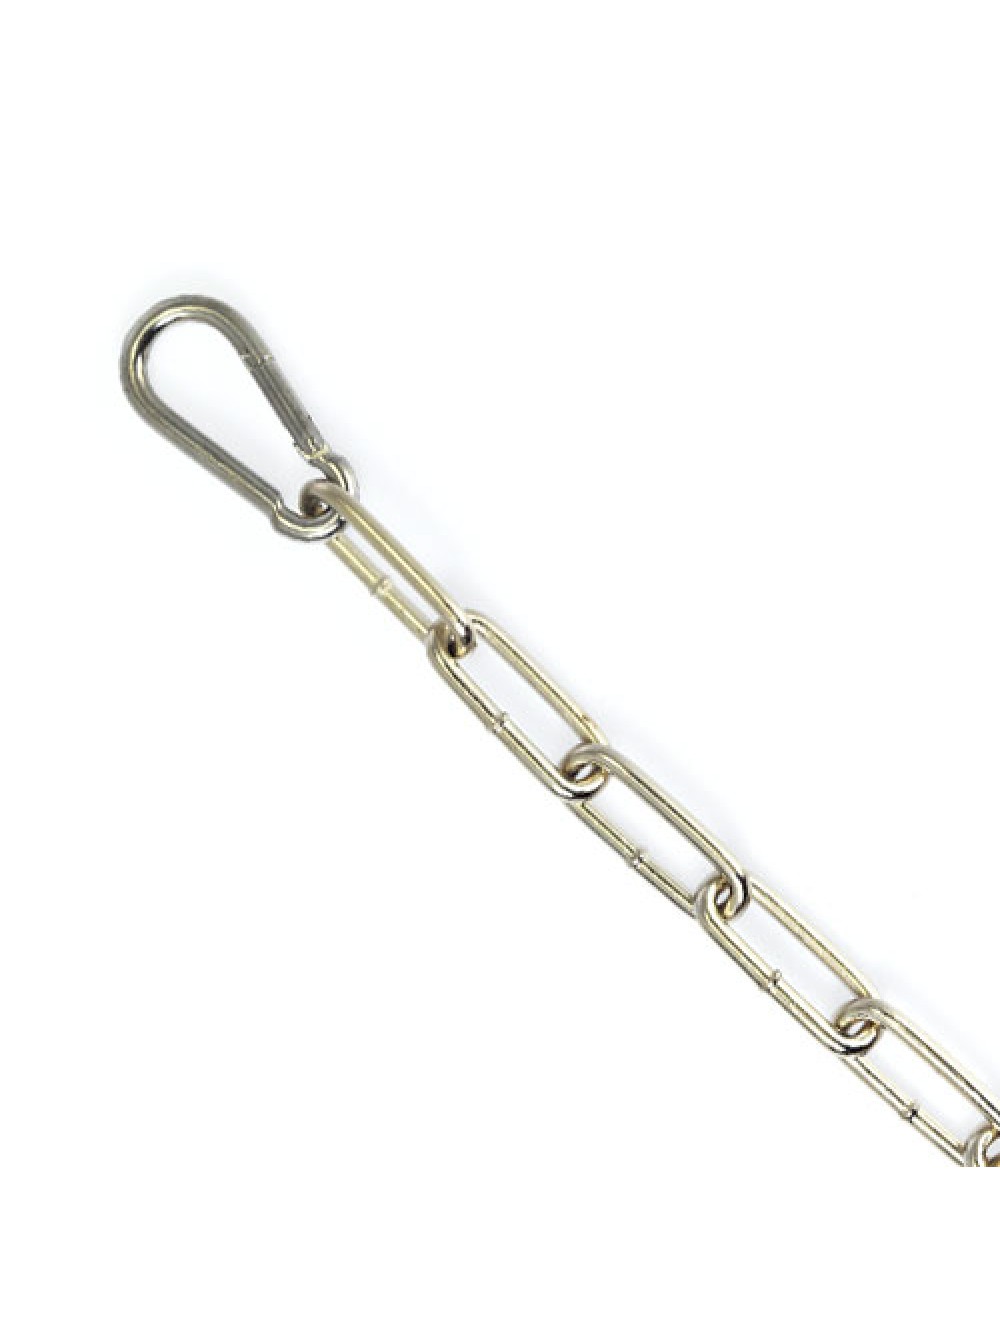 200cm Chain With Hooks 8718924230954